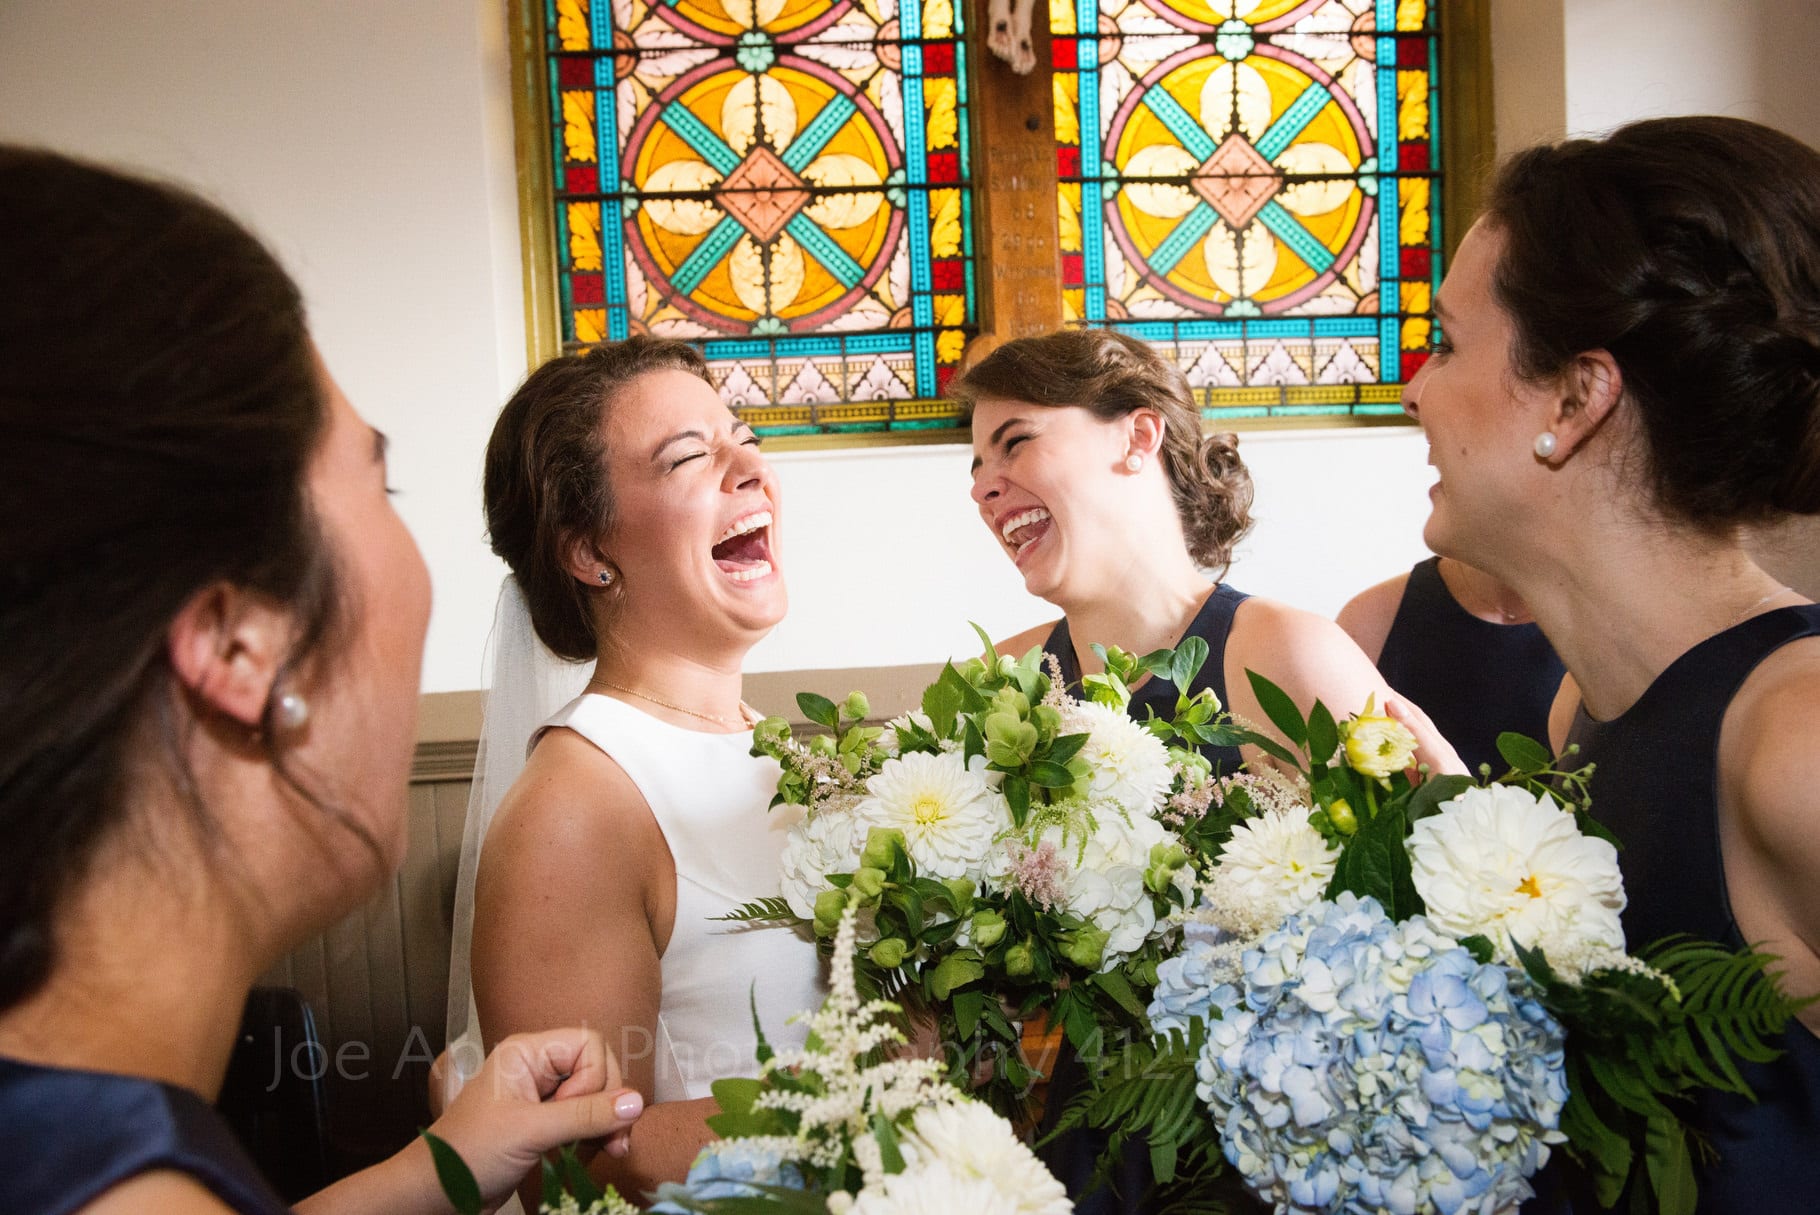 A bride and her bridesmaids laugh with joy after her wedding at St. Stanislaus church in the Strip District.